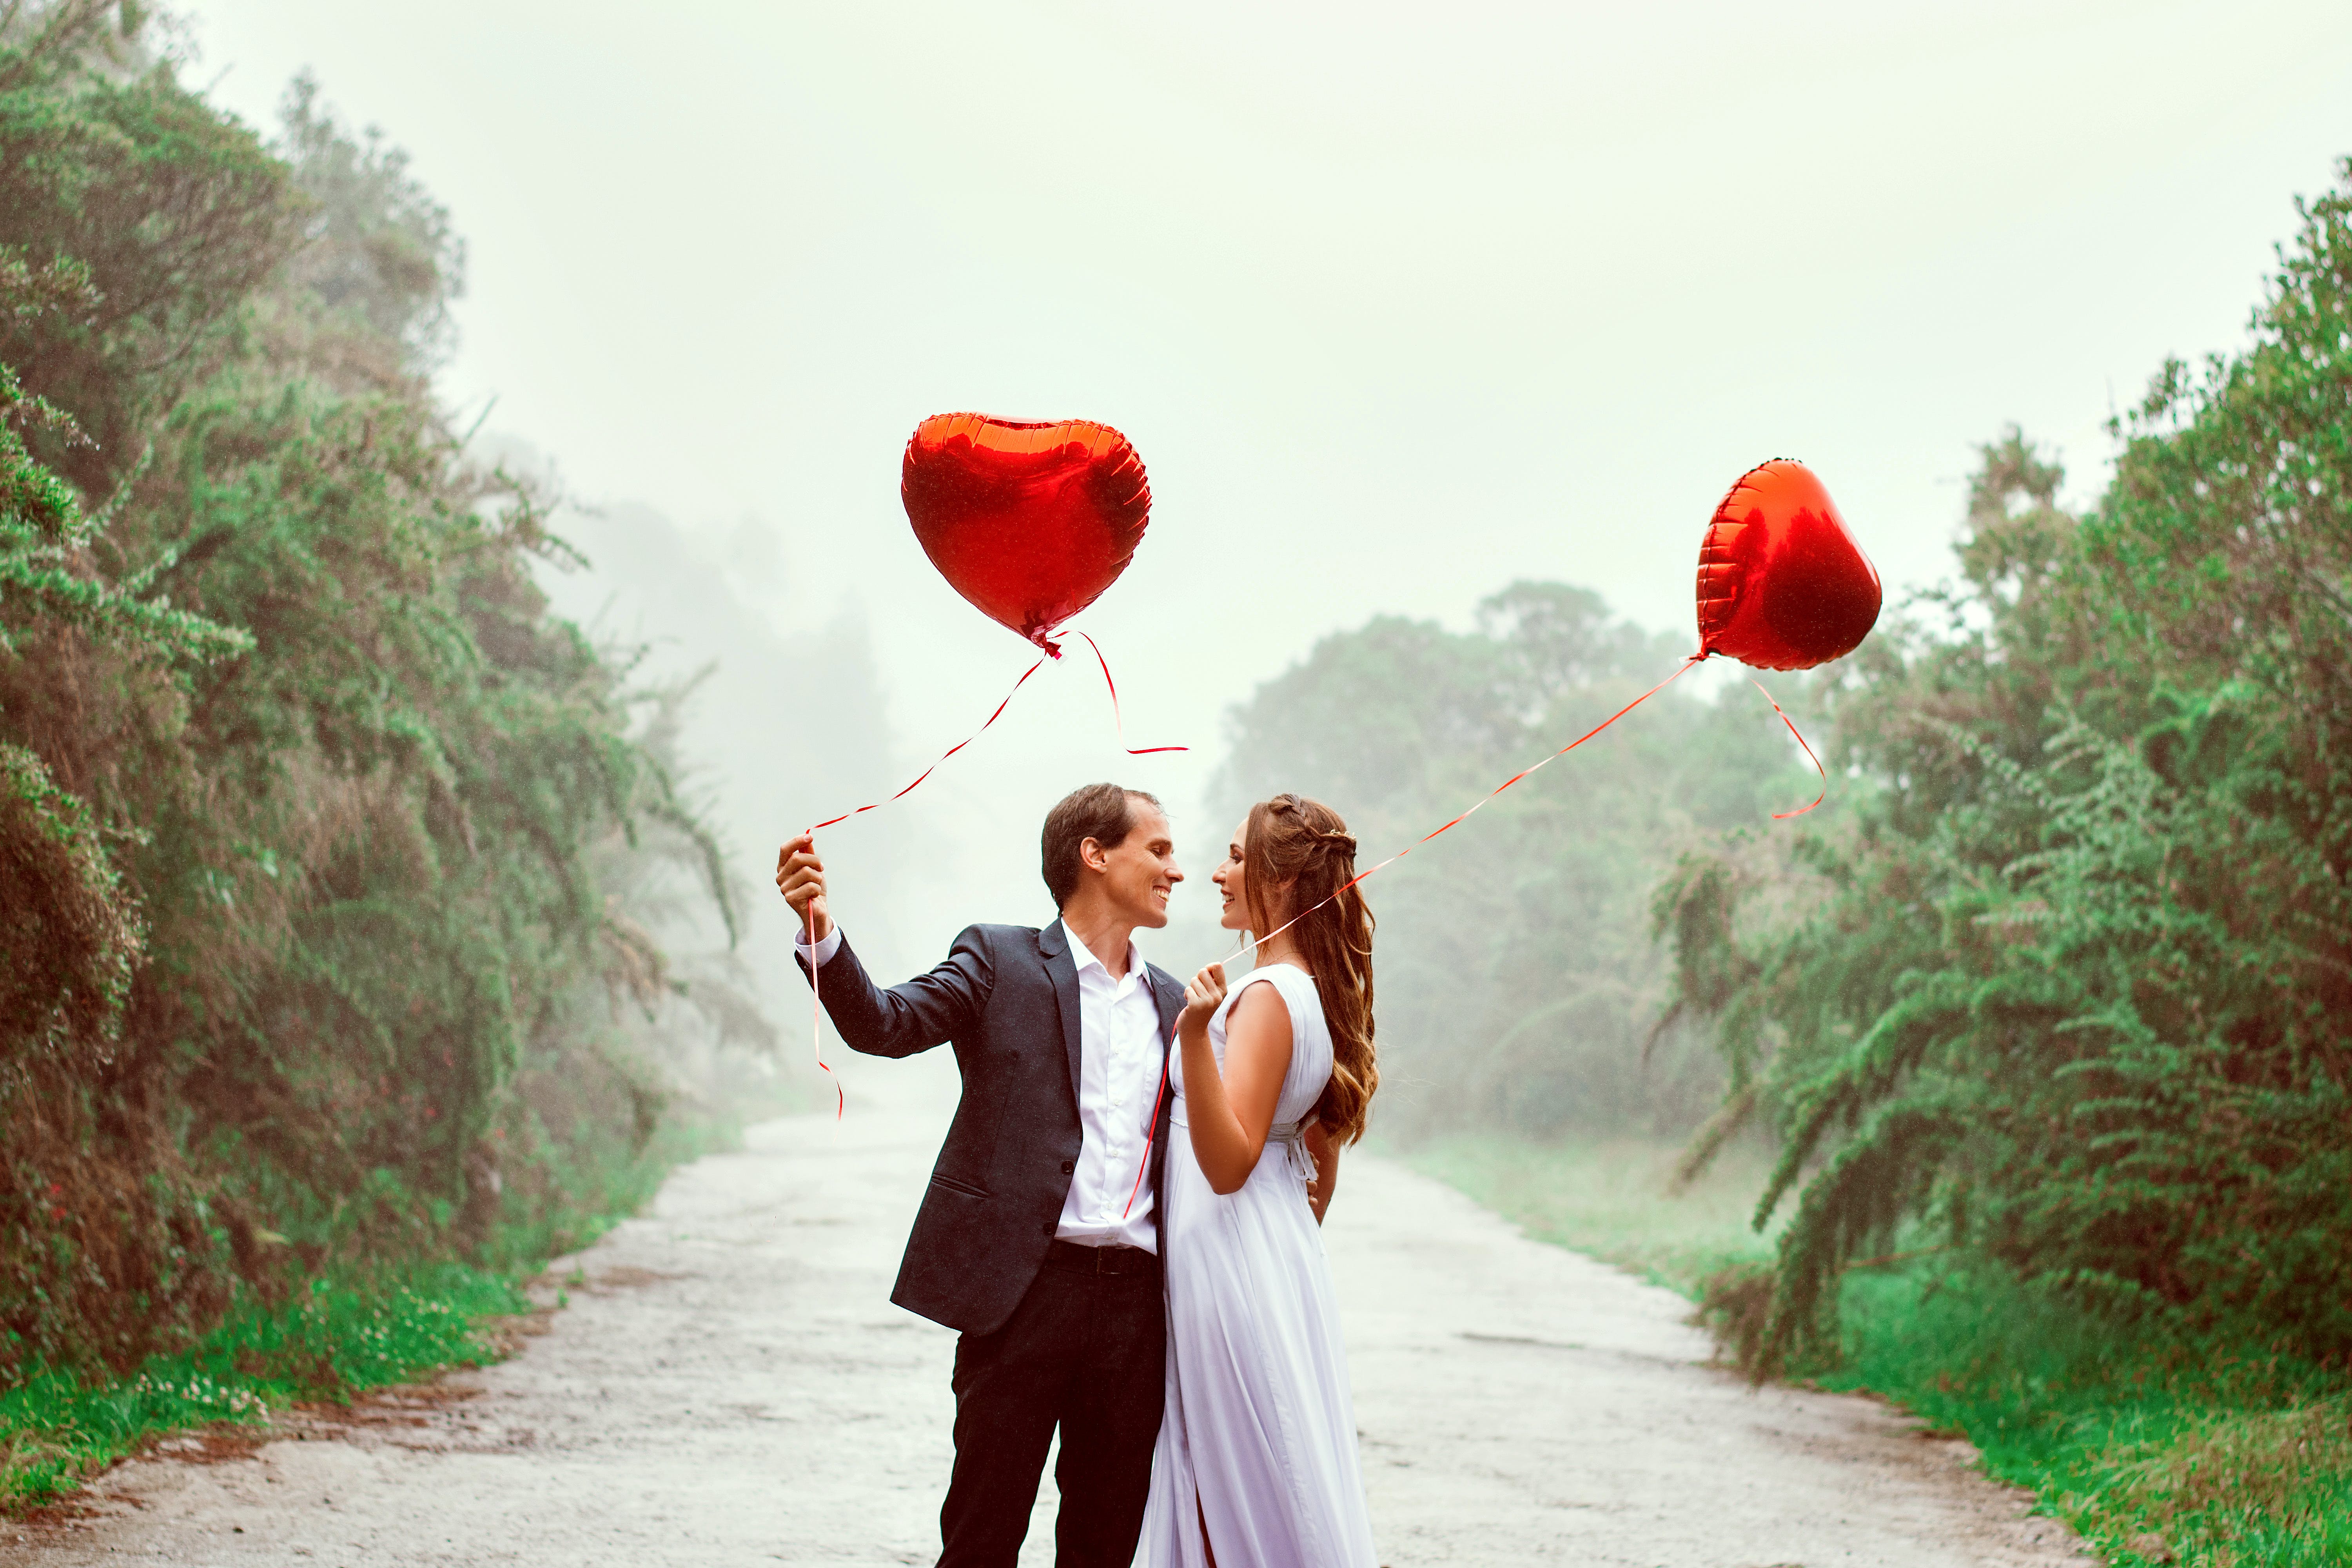 Best Valentine's Day Photoshoot Ideas for Photographers